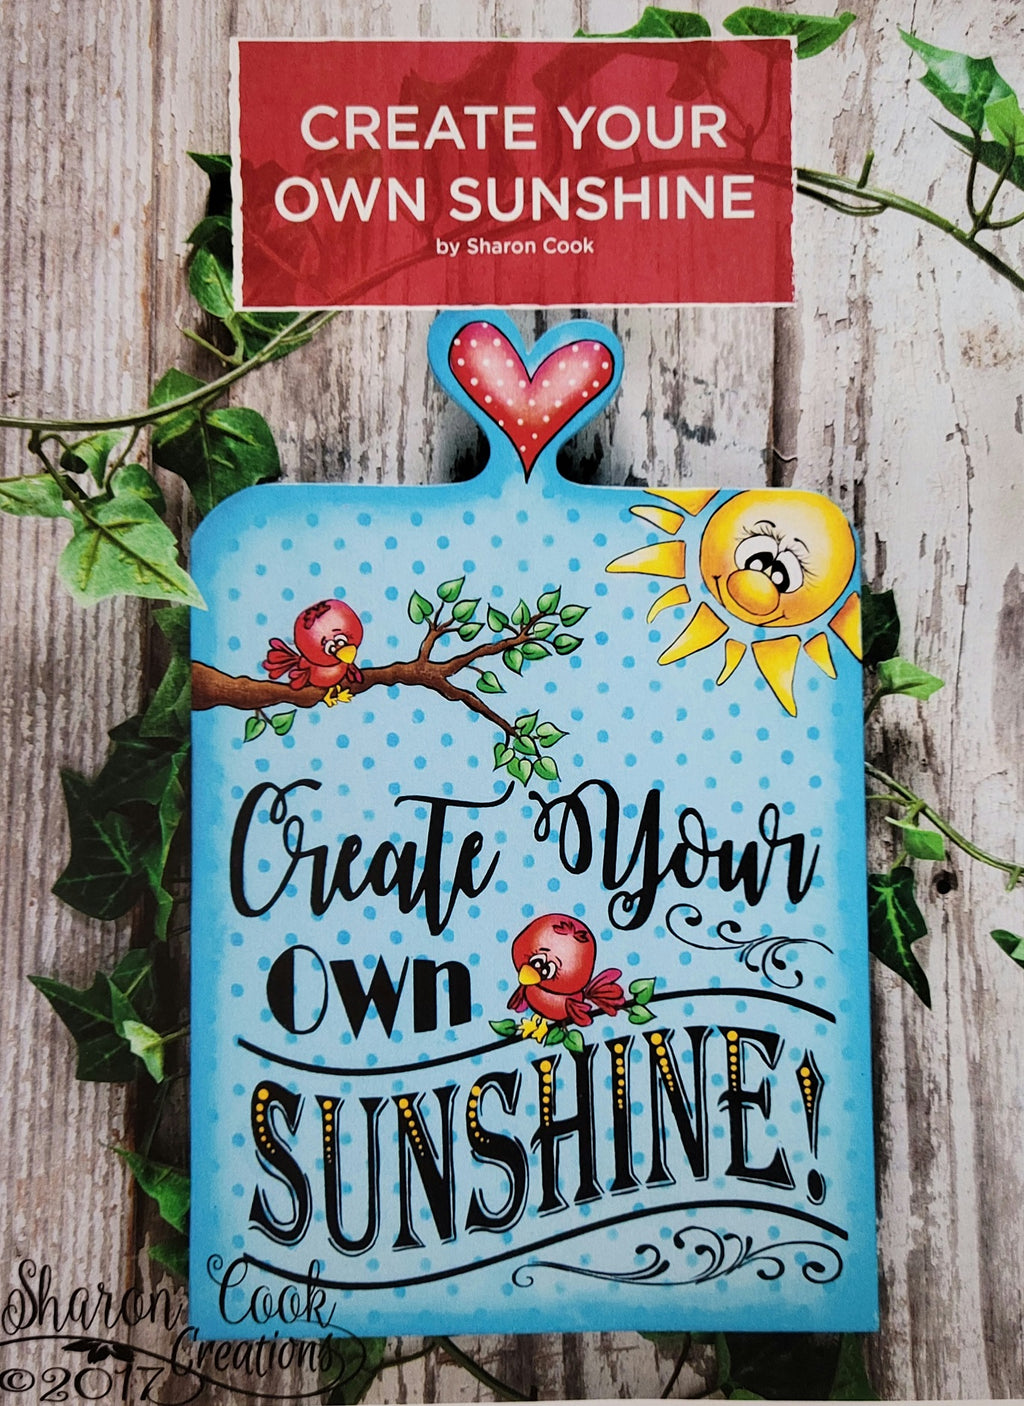 Create Your Own Sunshine packet by Sharon Cook